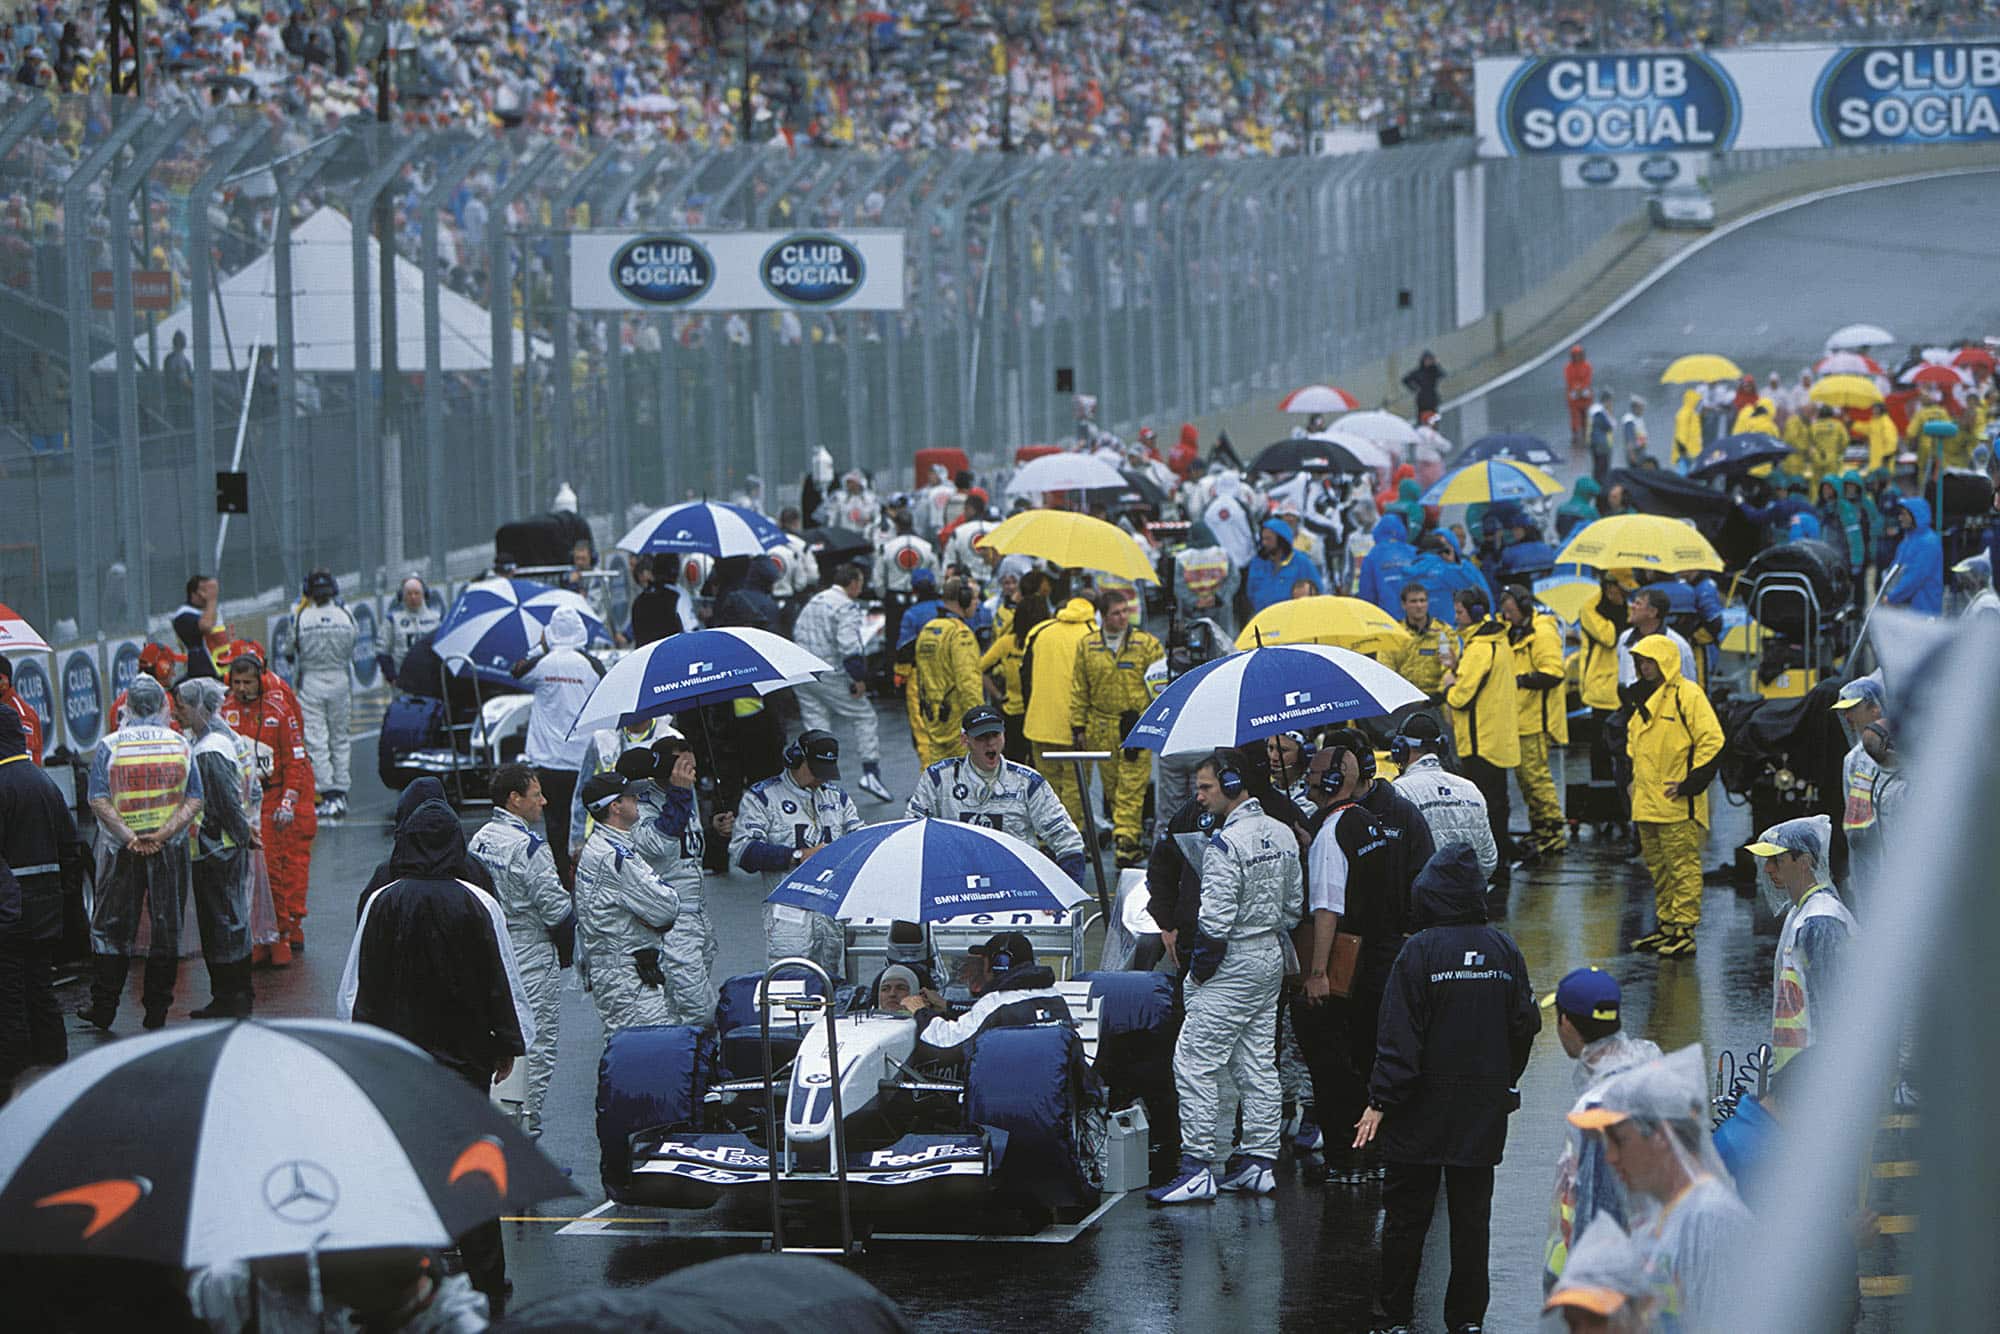 Umbrellas on the grid ahead of the start of the 2003 Brazilian Grand Prix